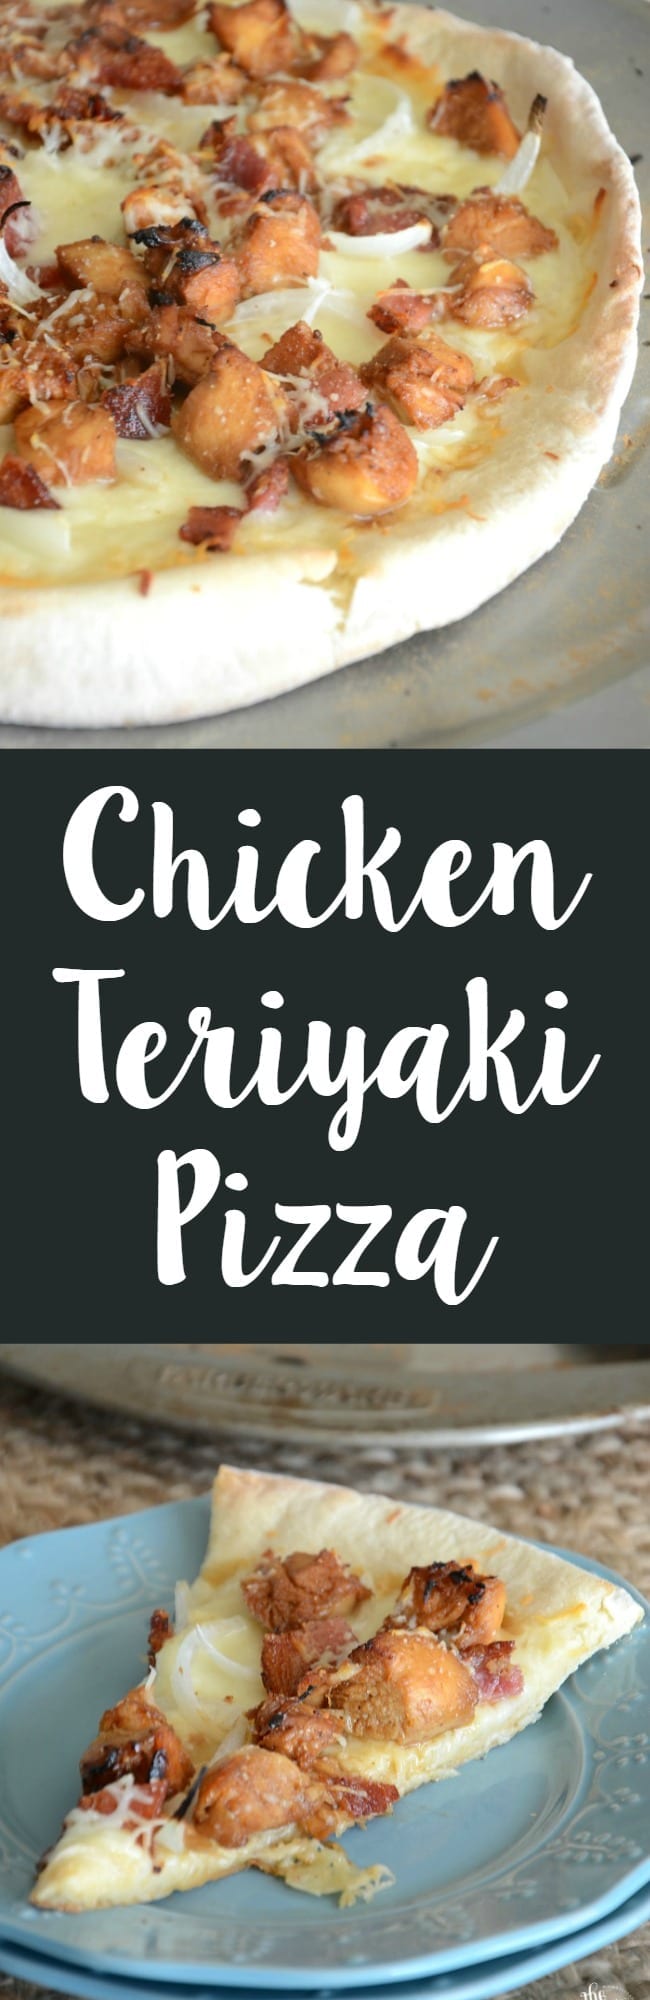 Chicken teriyaki pizza!  Make this easy weeknight meal in no time!